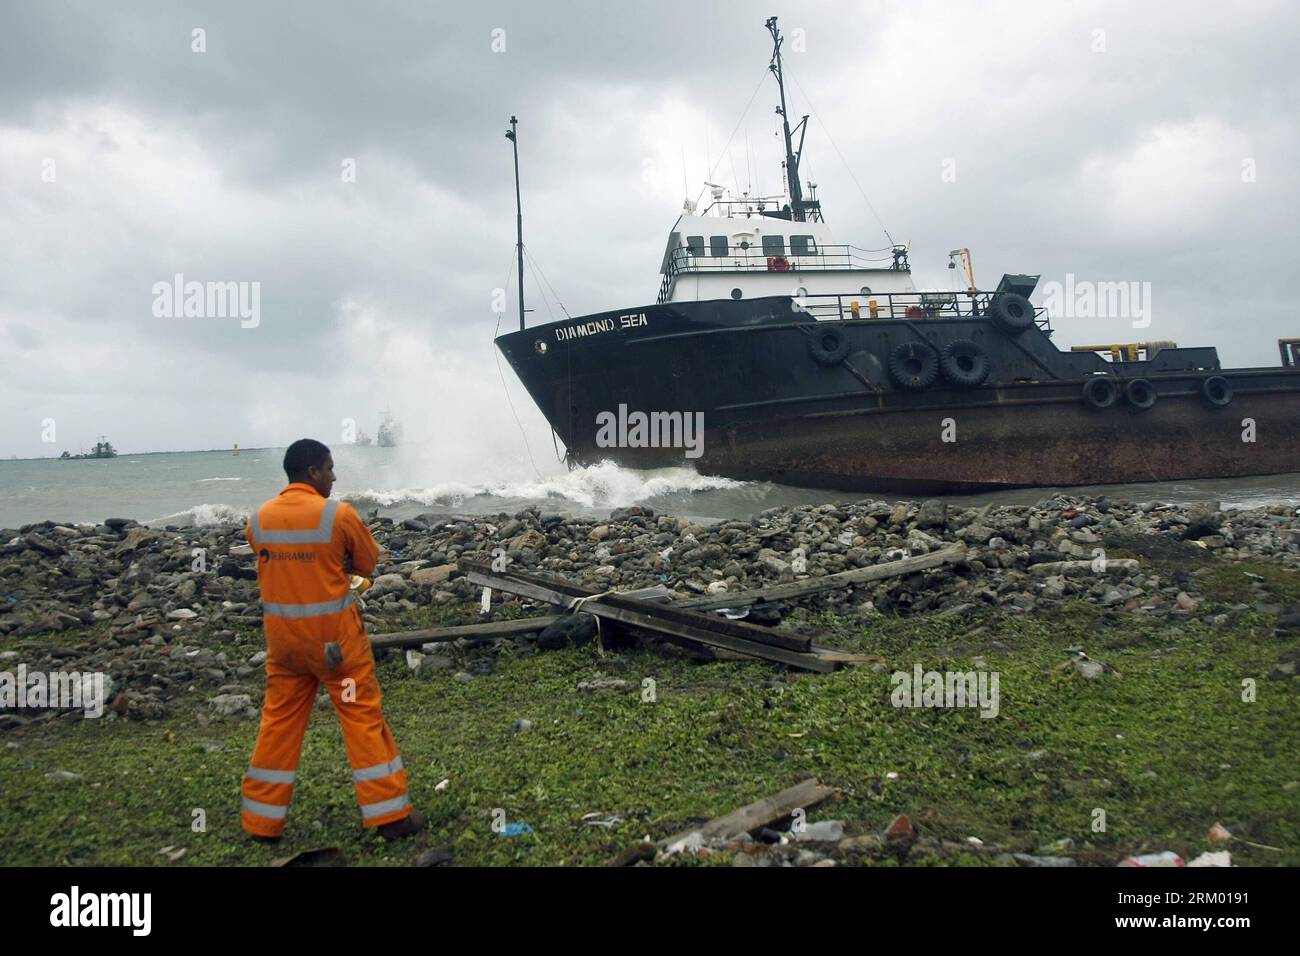 (130305) -- COLON, March 4, 2013 (xinhua) -- A rescuer observes a stranded boat on the shore of Panama Canal s north coast entrance in Colon, Panama, March 4, 2013. Six ships ran aground and one person drowned due to strong winds and heavy rains caused by a cold front in Panama, according to Director of Civil Protection National System (NSCP) Arturo Alvarado. (Xinhua/Str) (djj) PANAMA-COLON-WEATHER PUBLICATIONxNOTxINxCHN   Colon March 4 2013 XINHUA a Rescuer observes a stranded Boat ON The Shore of Panama Canal S North Coast Entrance in Colon Panama March 4 2013 Six Ships Ran aground and One P Stock Photo